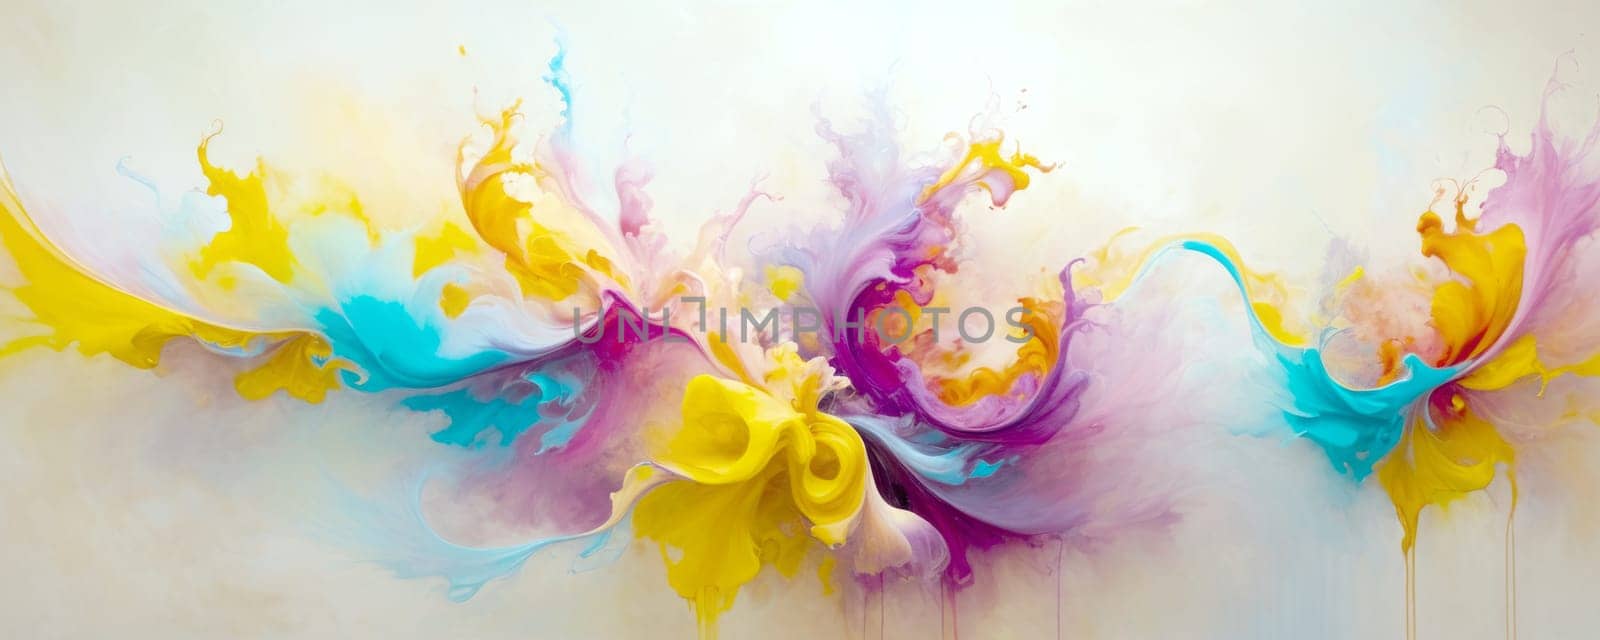 Colorful Explosion of Paint on a Light Background by nkotlyar